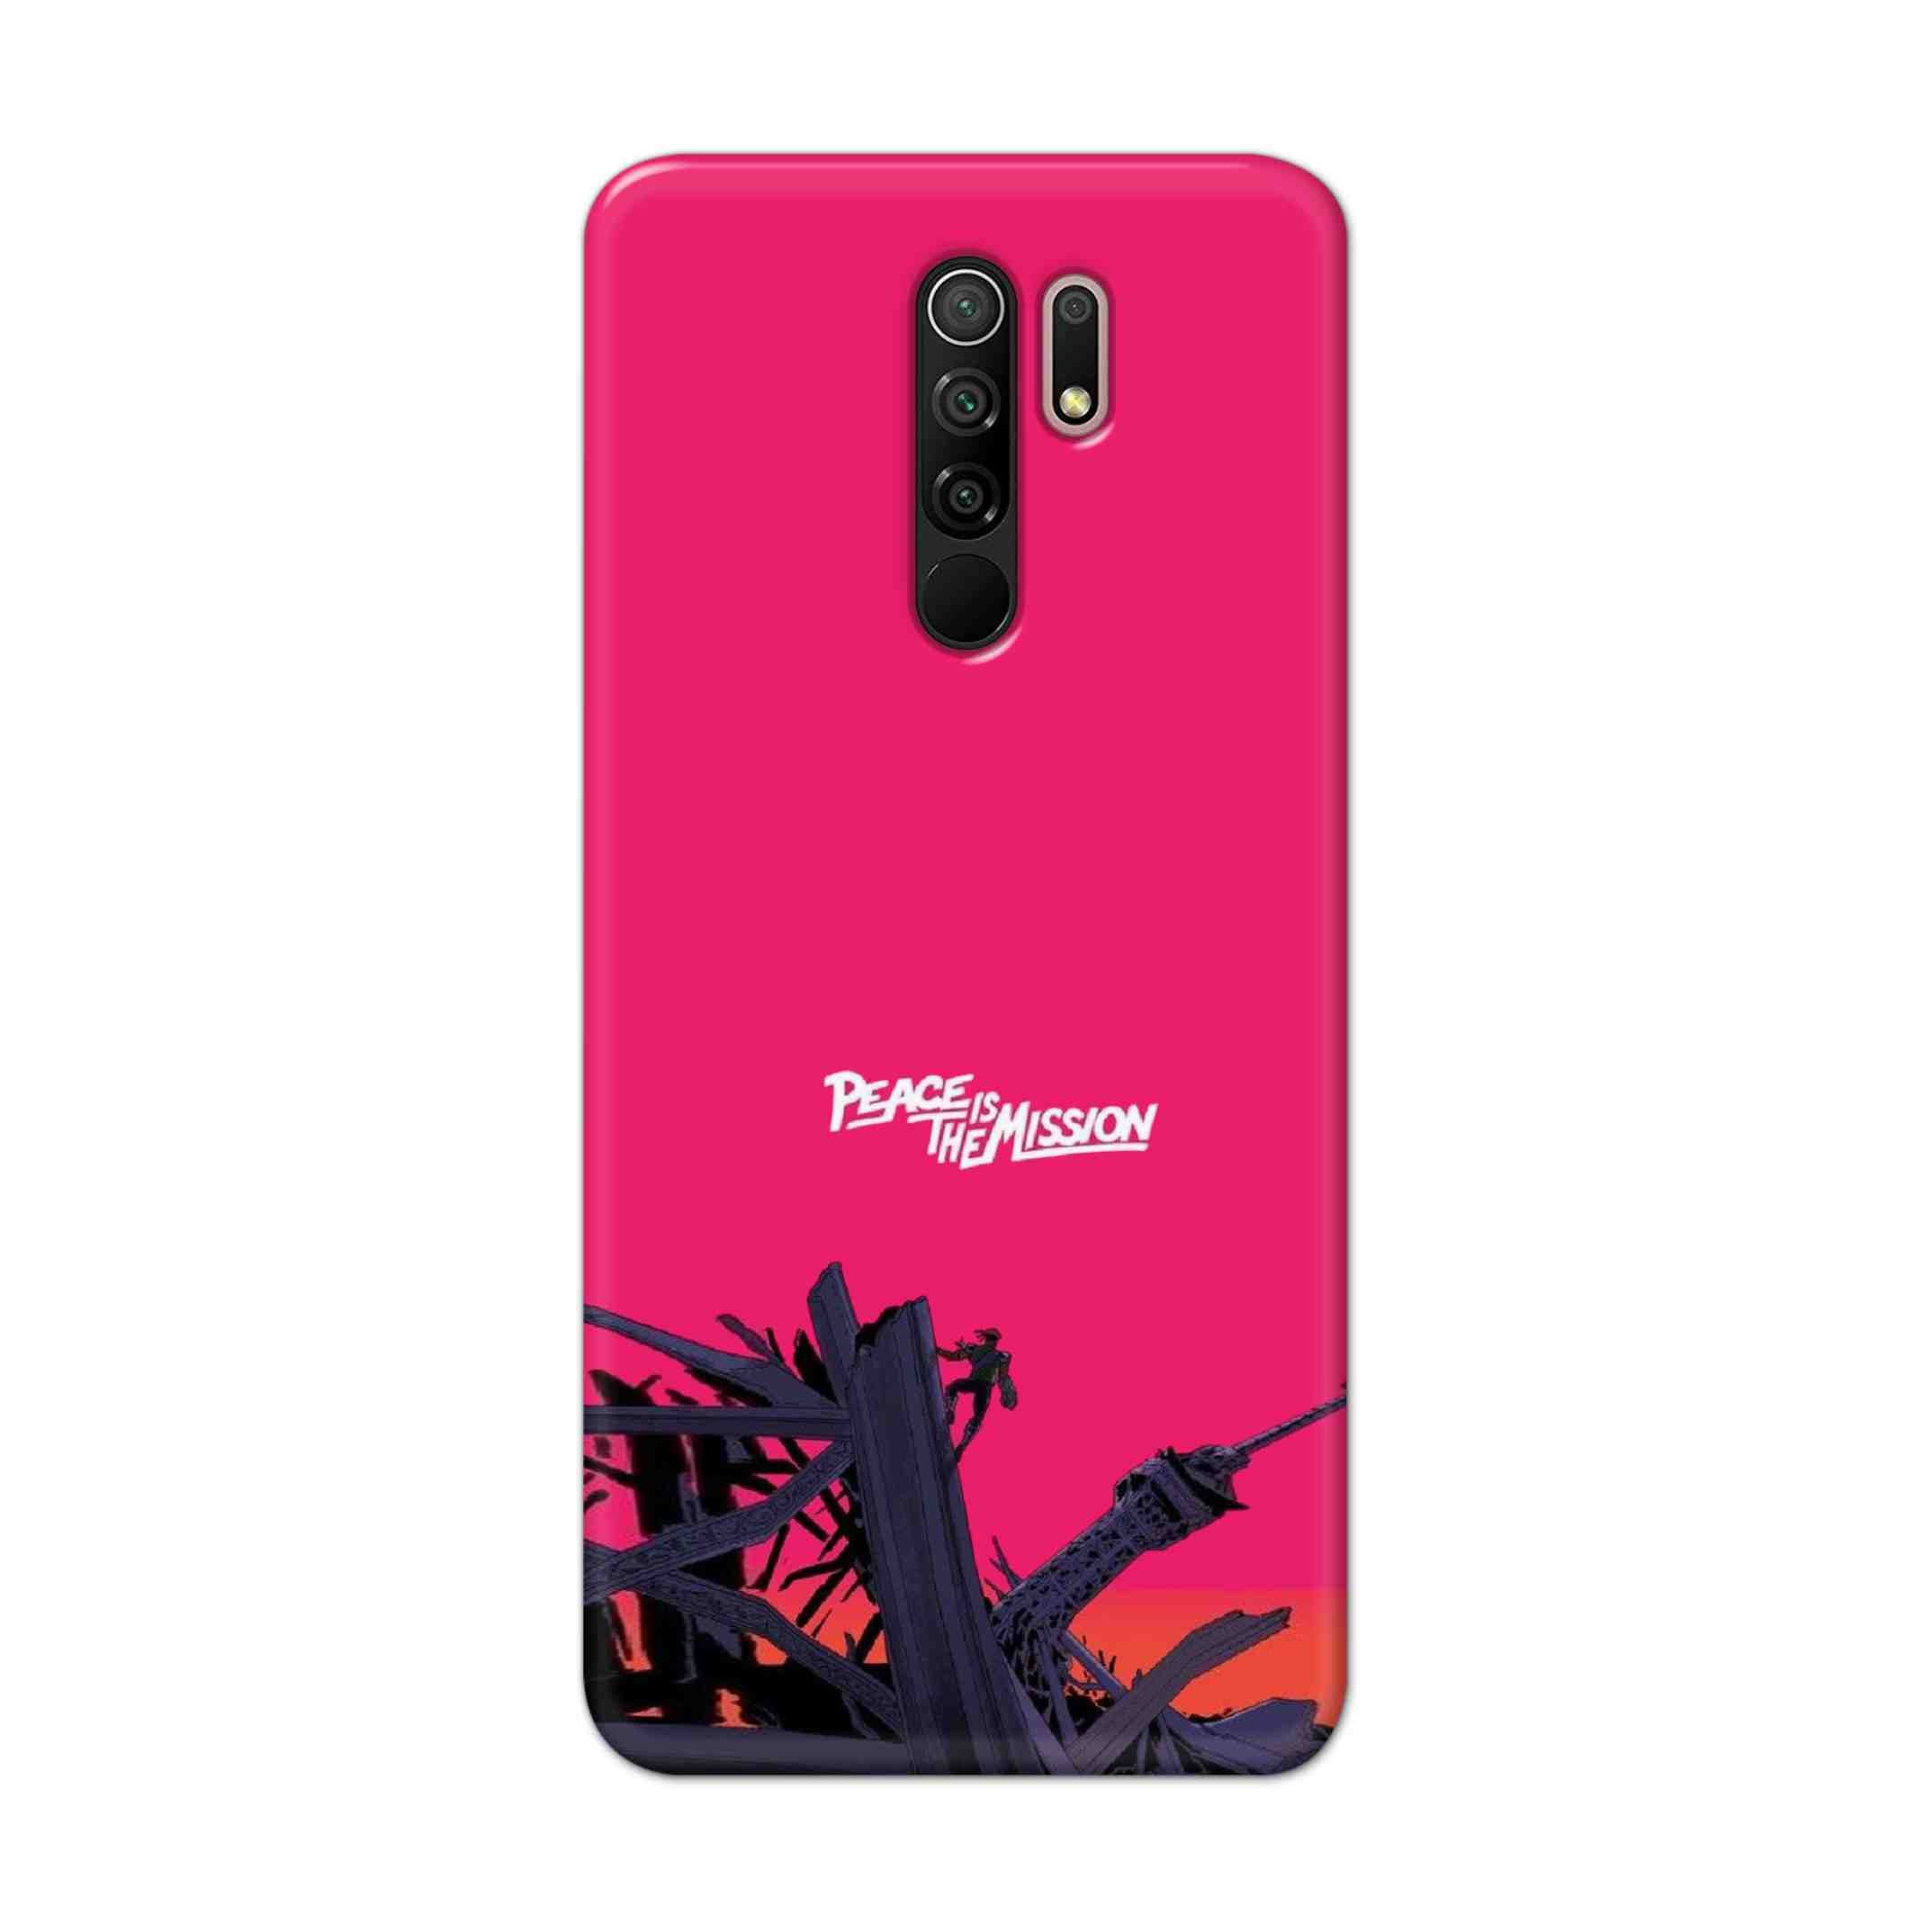 Buy Peace Is The Mission Hard Back Mobile Phone Case Cover For Xiaomi Redmi 9 Prime Online